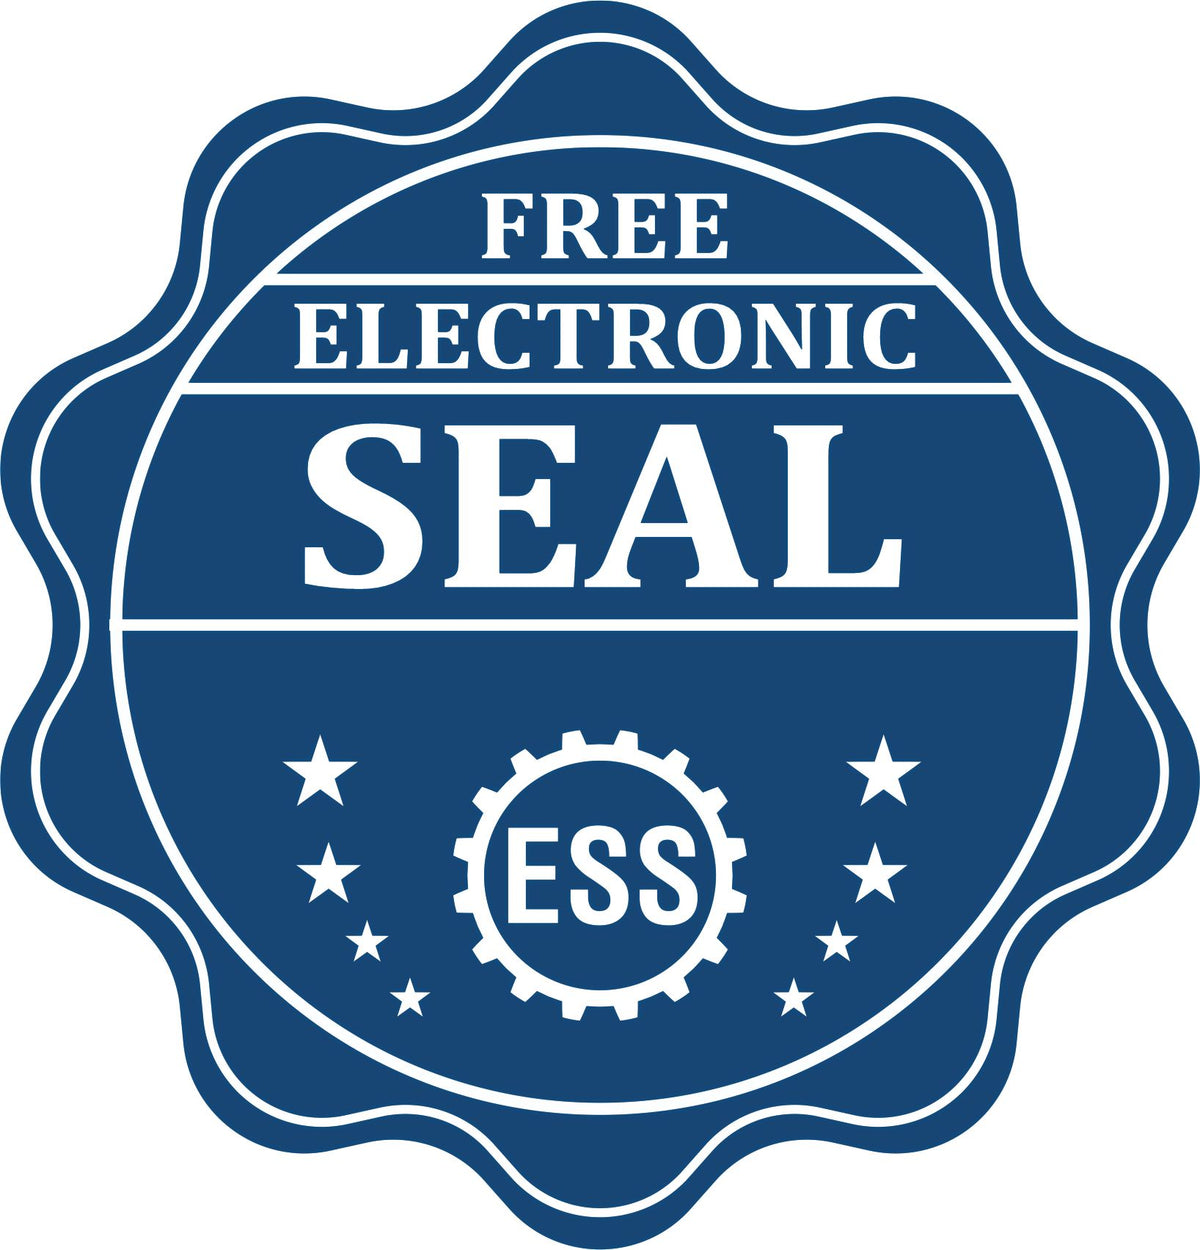 A badge showing a free electronic seal for the Heavy-Duty Florida Rectangular Notary Stamp with stars and the ESS gear on the emblem.